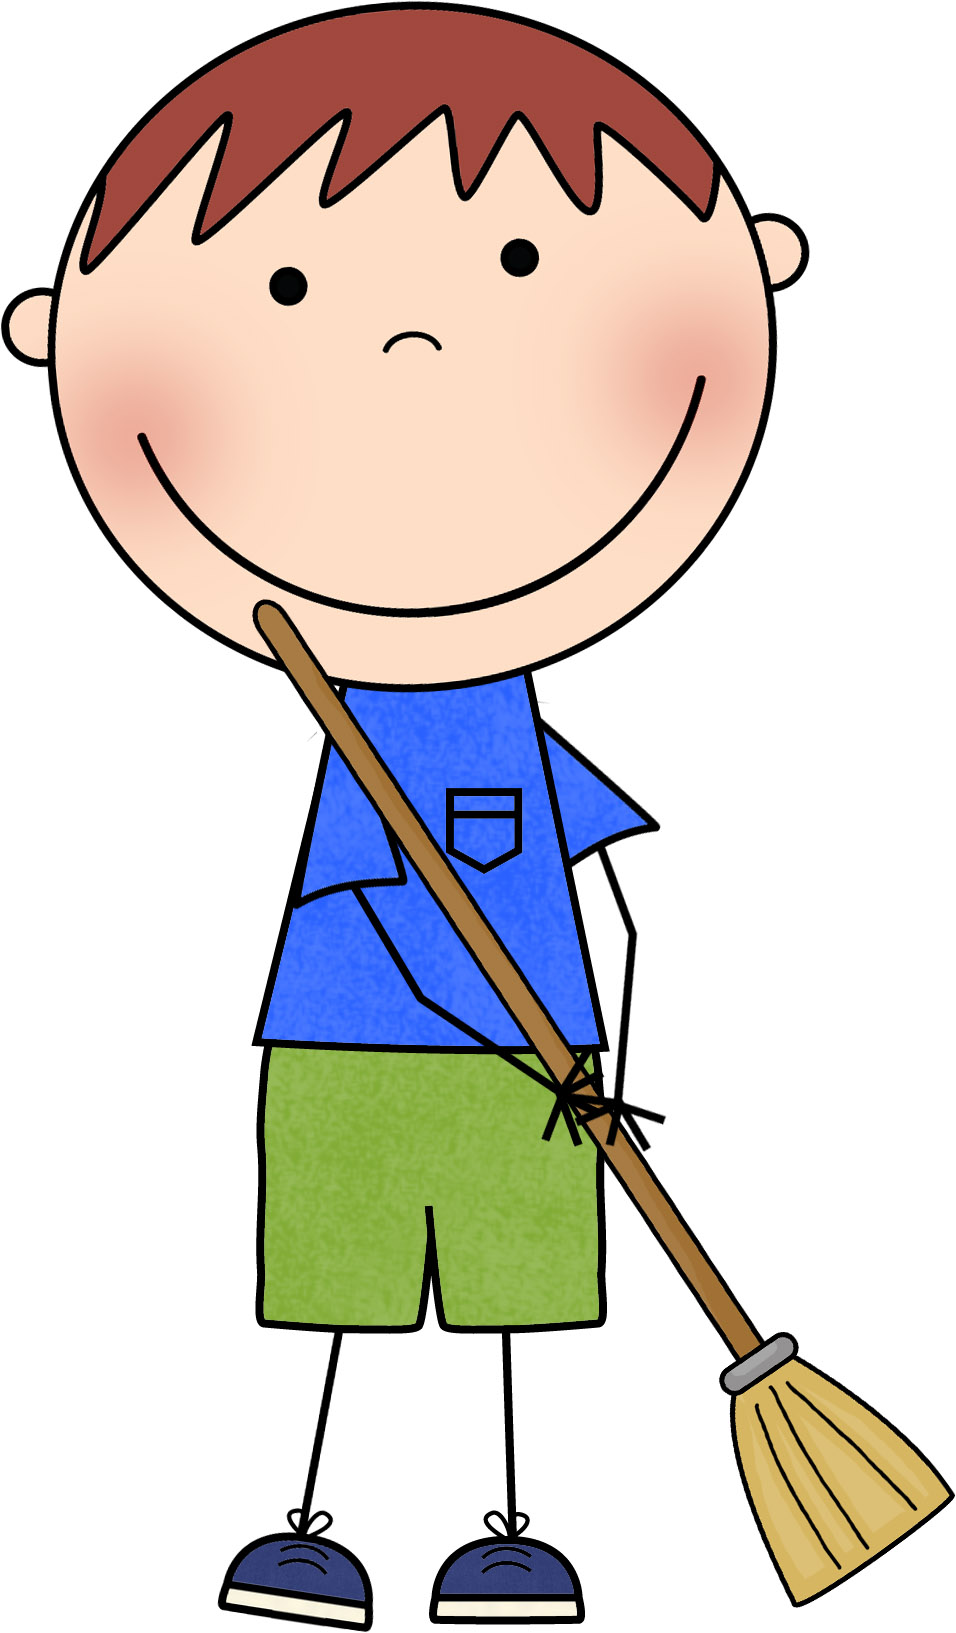 Cleaning crew clip art